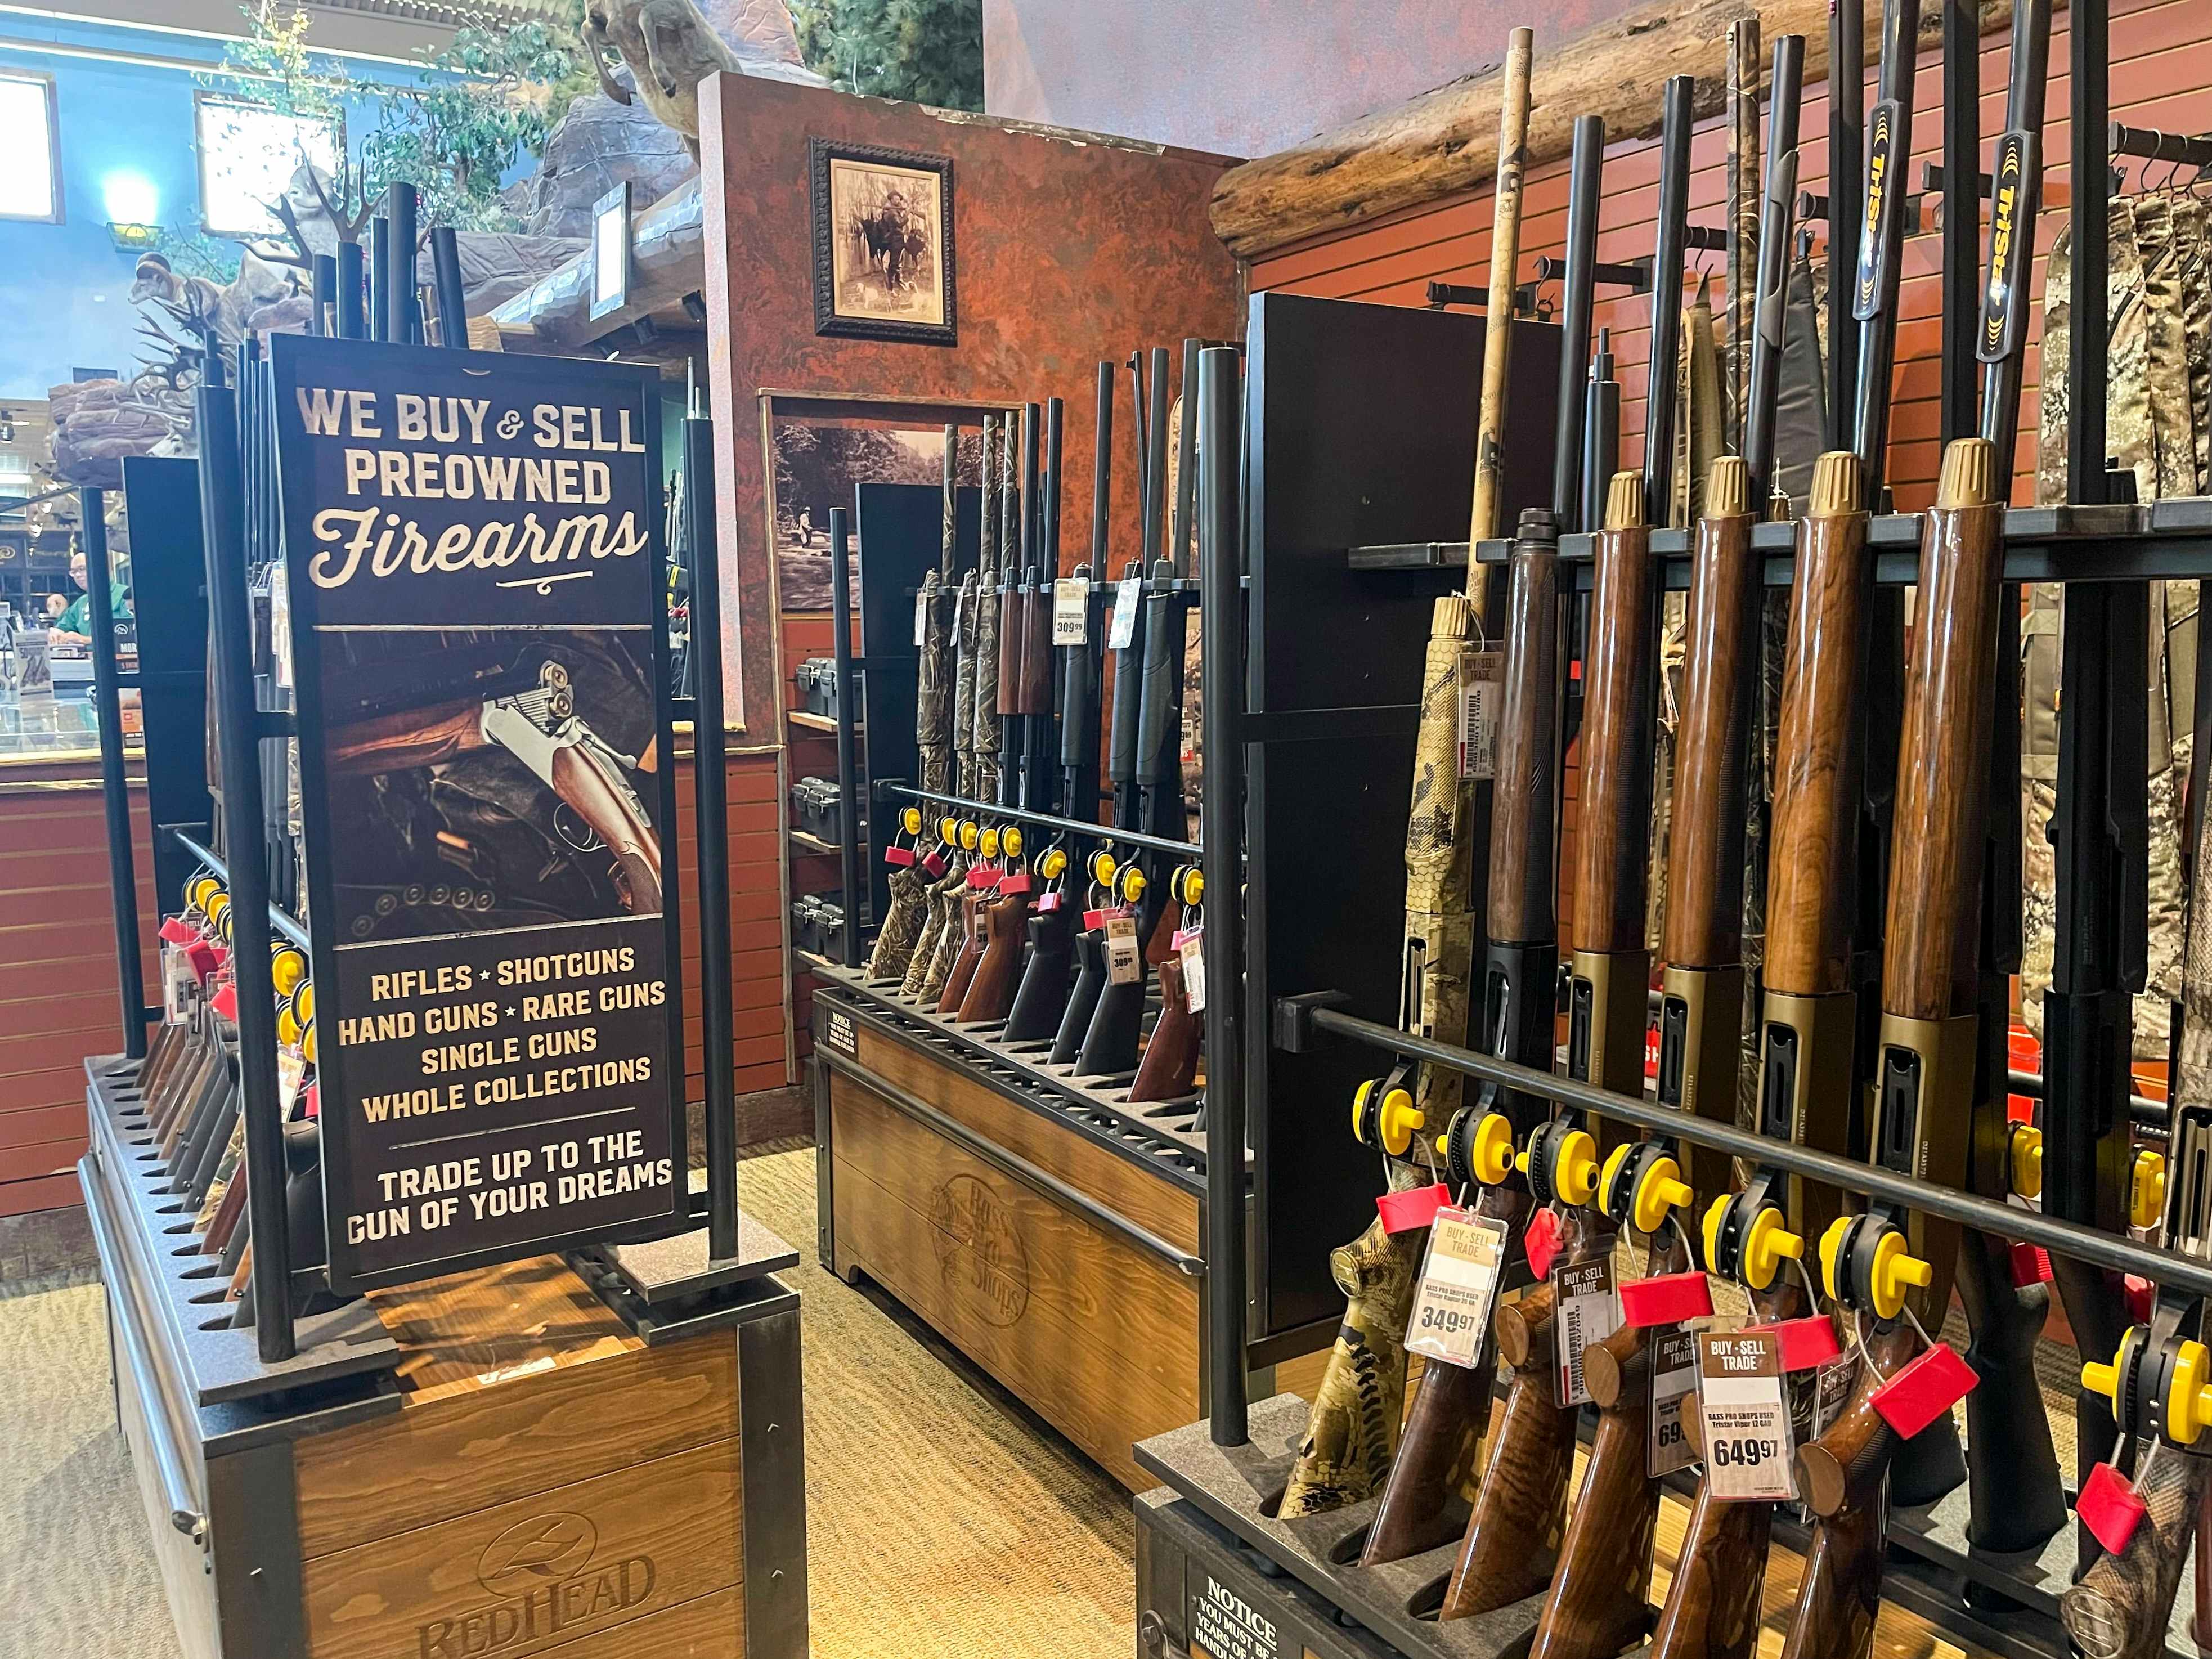 The firearm display inside Cabela's next to a sign that reads, "We buy & sell preowned firearms